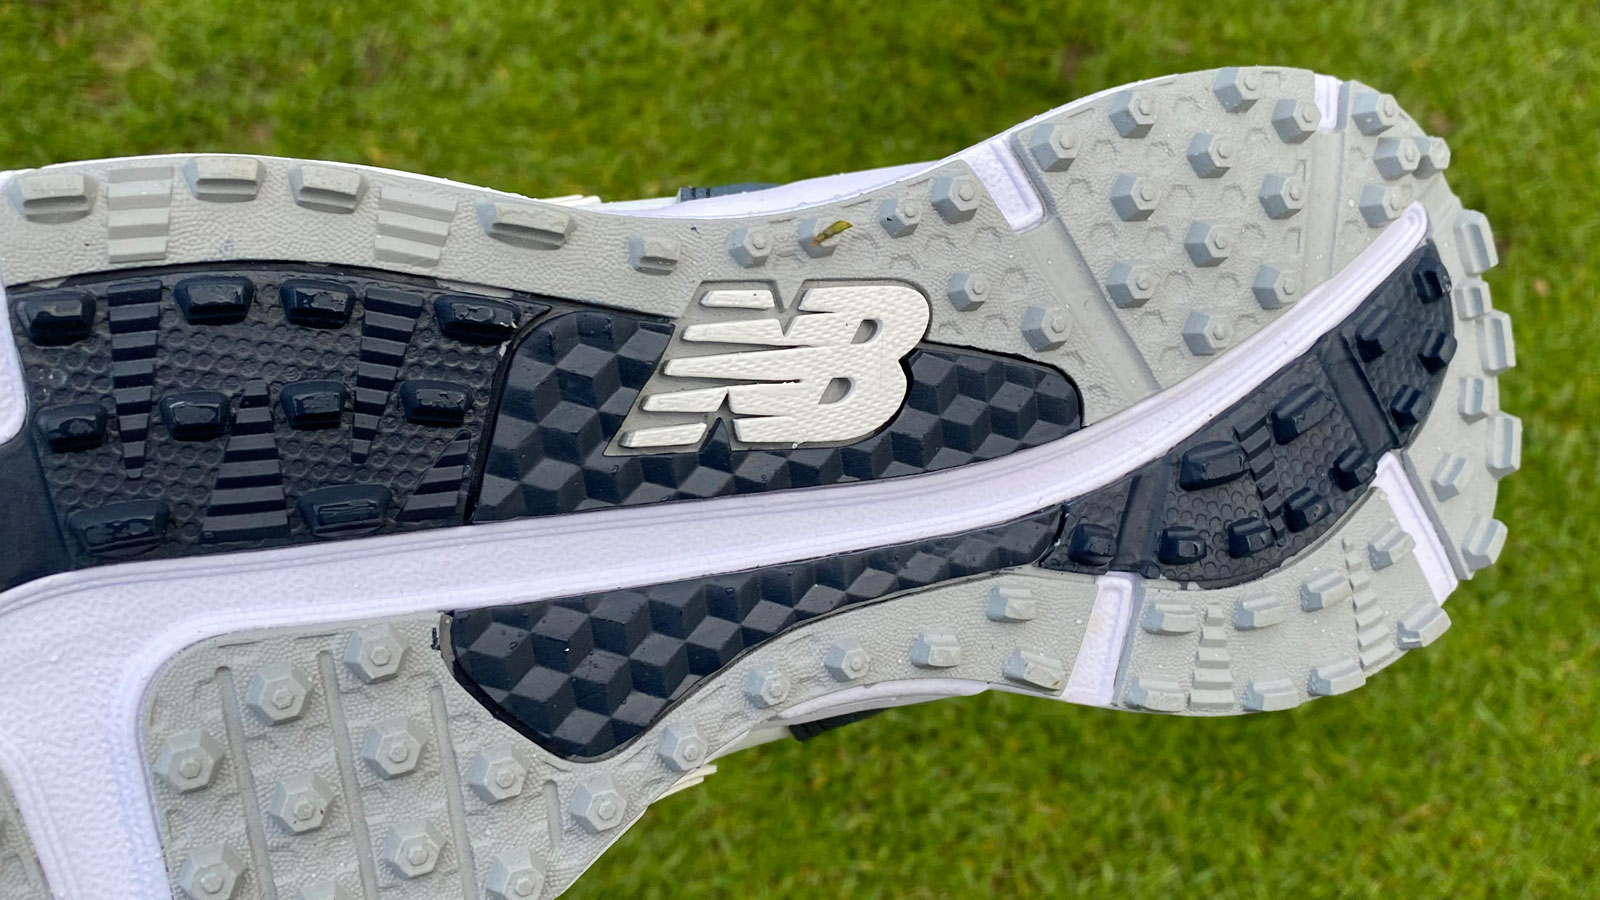 The sole of the New Balance 997 SL Golf Shoe